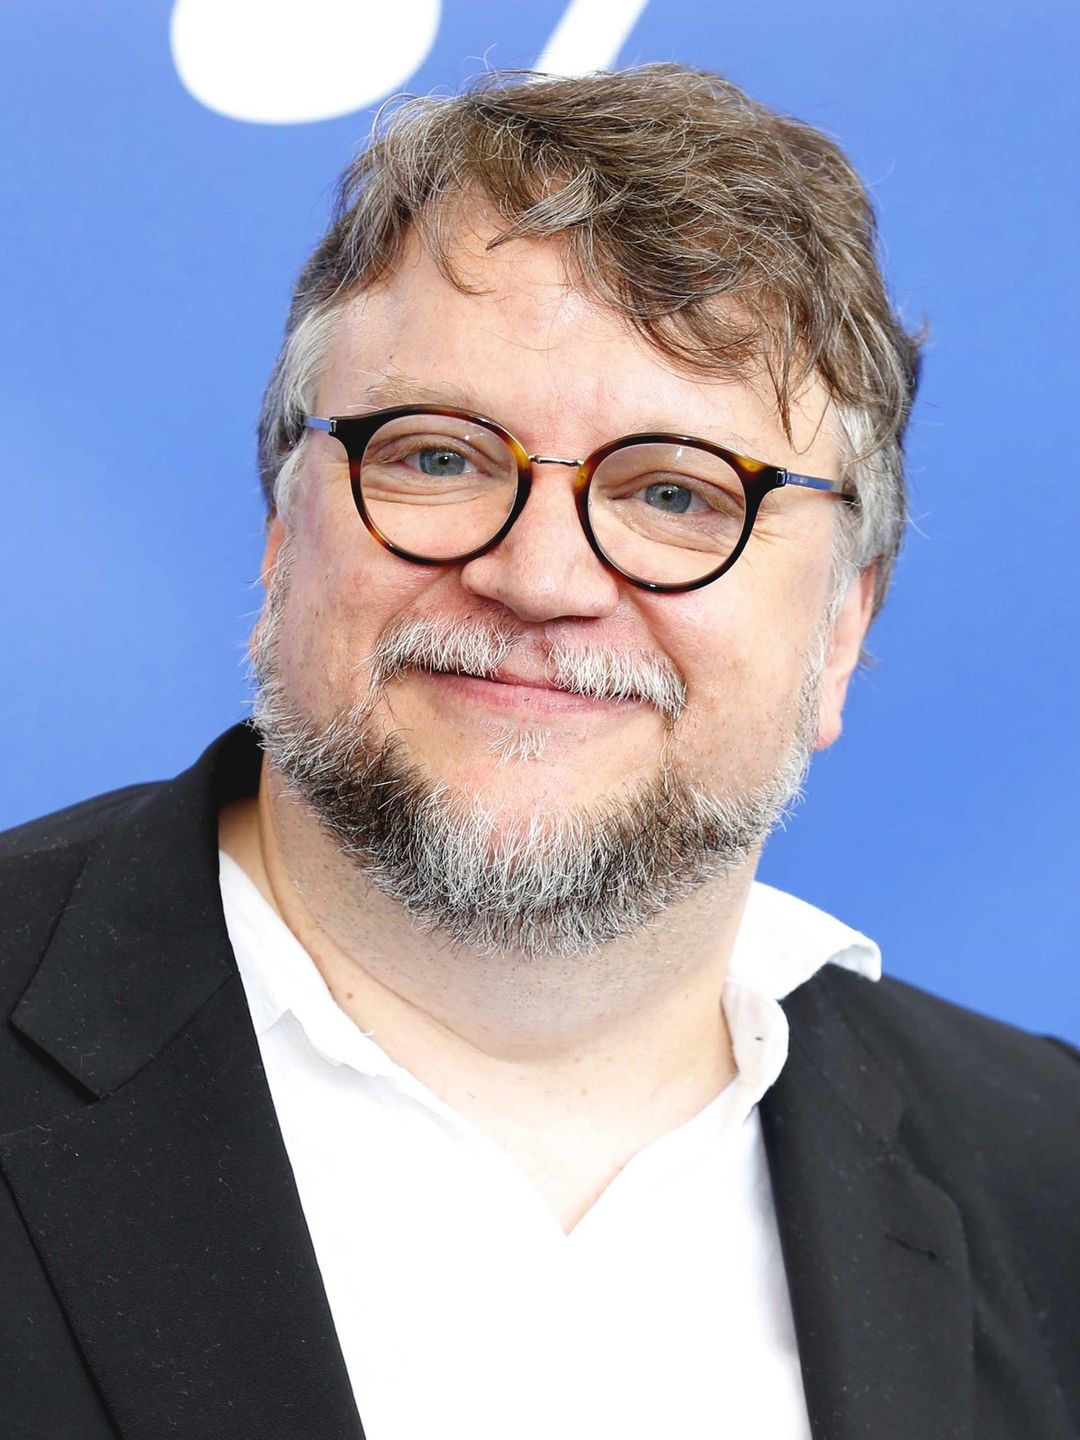 Guillermo del Toro does he have a wife